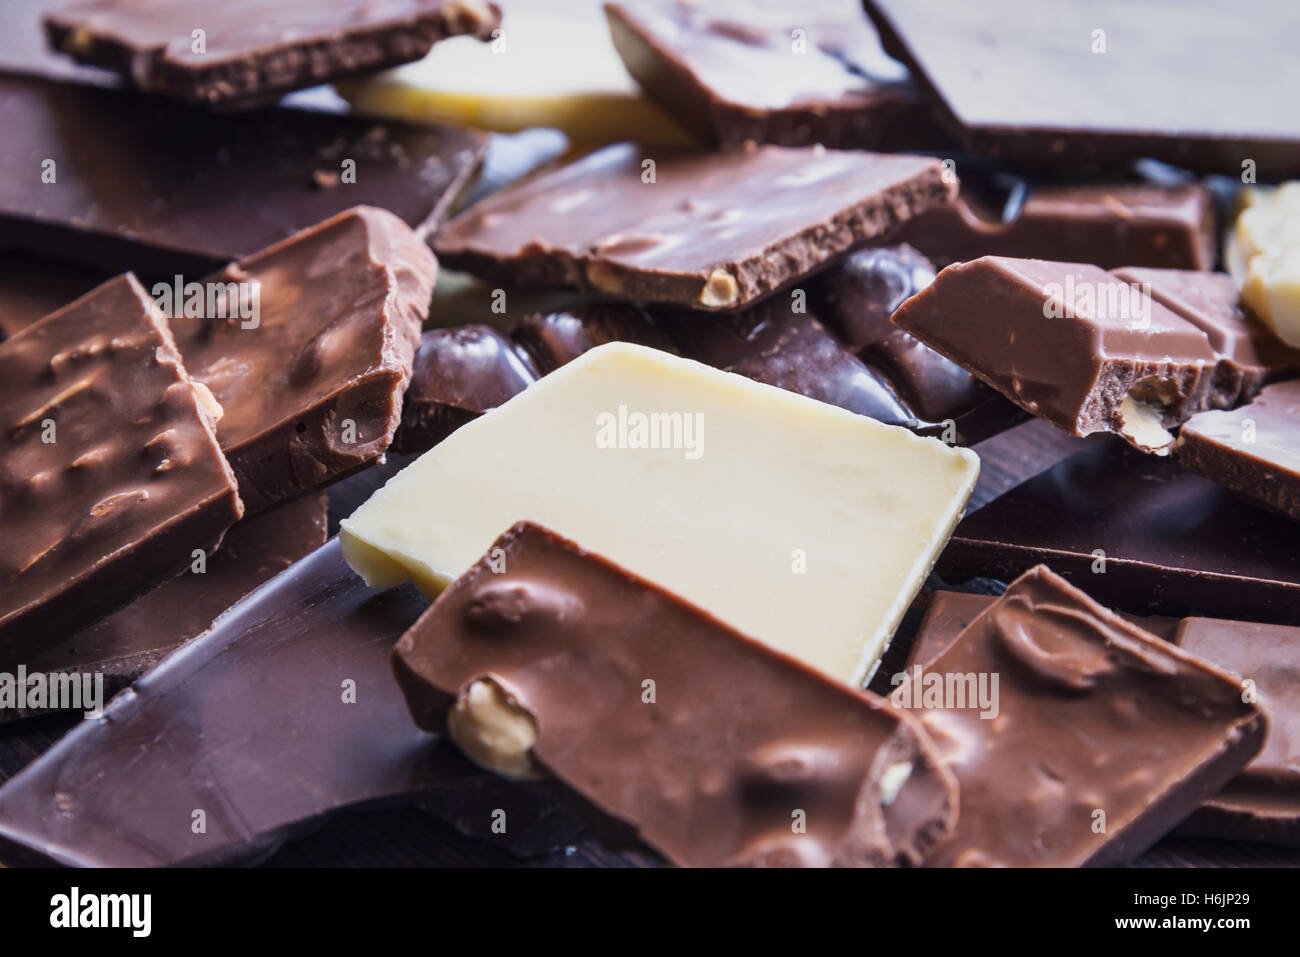 Close up of a heap of various chocolate pieces over dark wood background. Dark, milk, white and nuts chocolate bars. Stock Photo